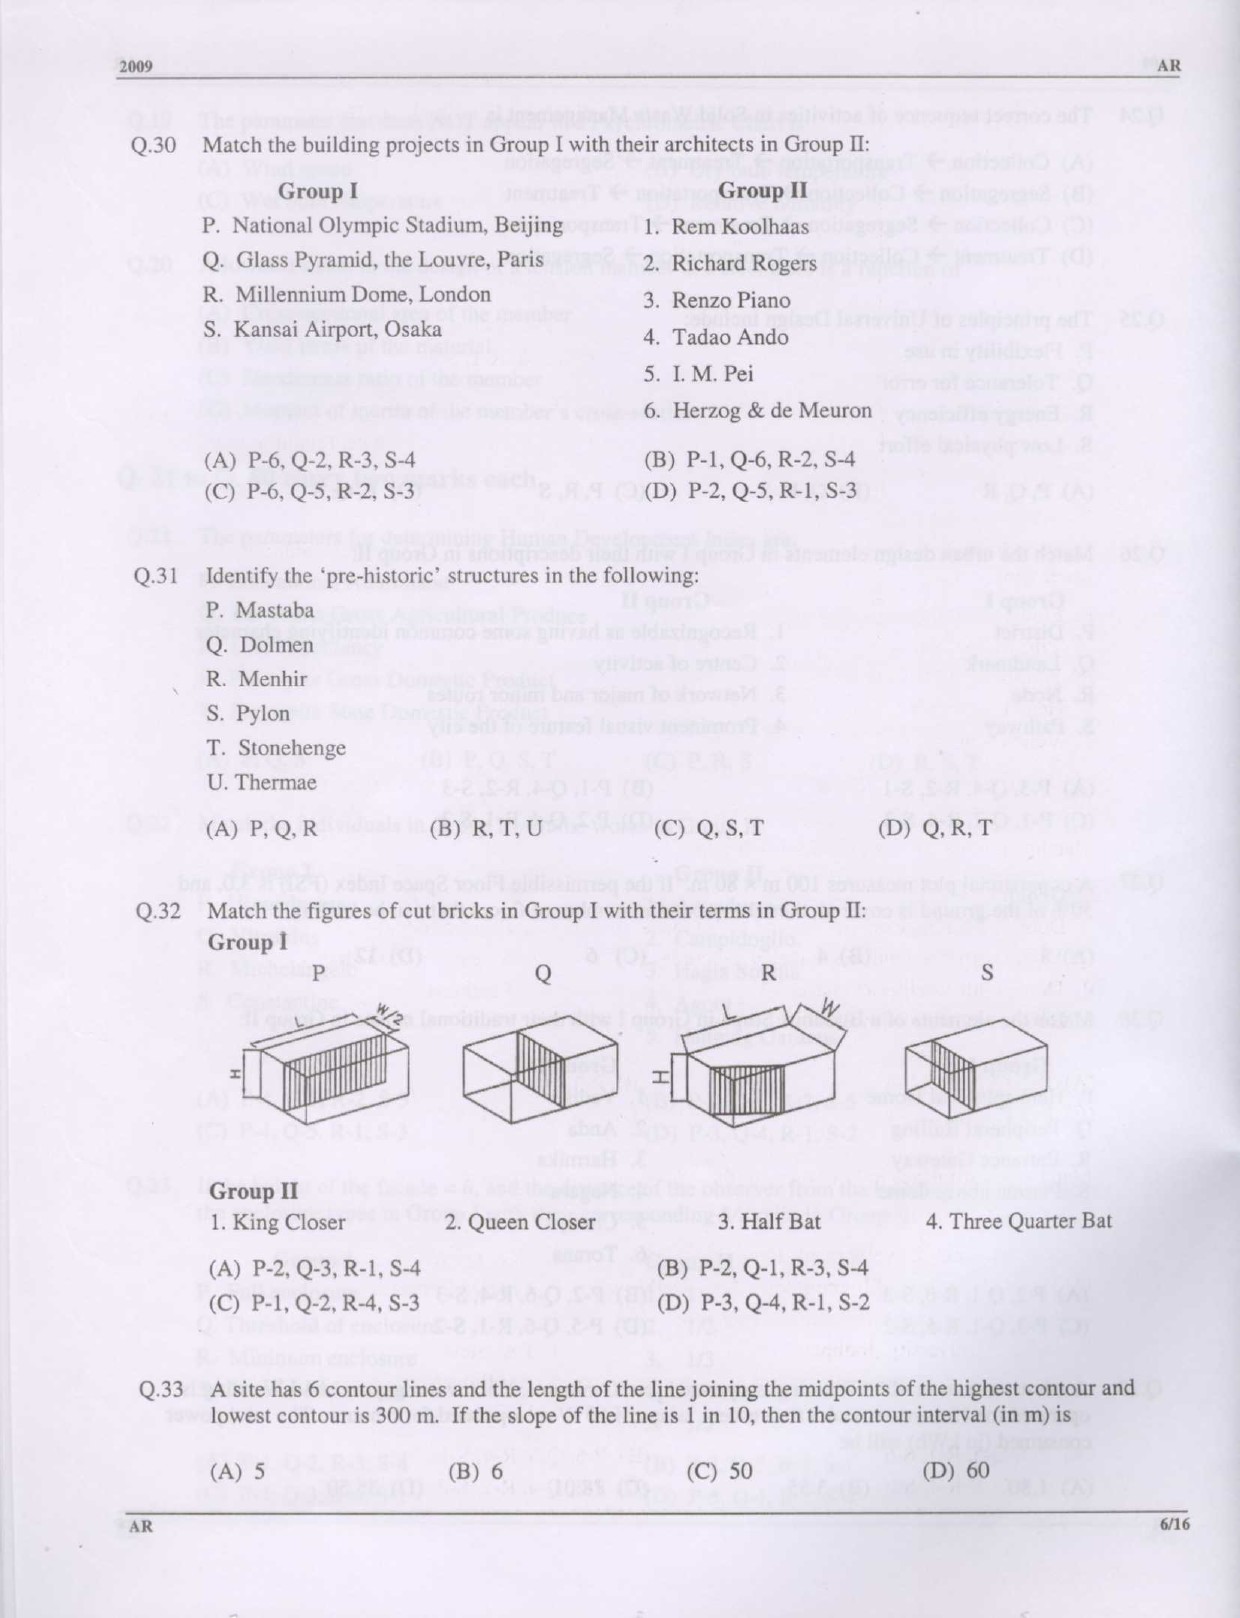 GATE Exam Question Paper 2009 Architecture and Planning 6